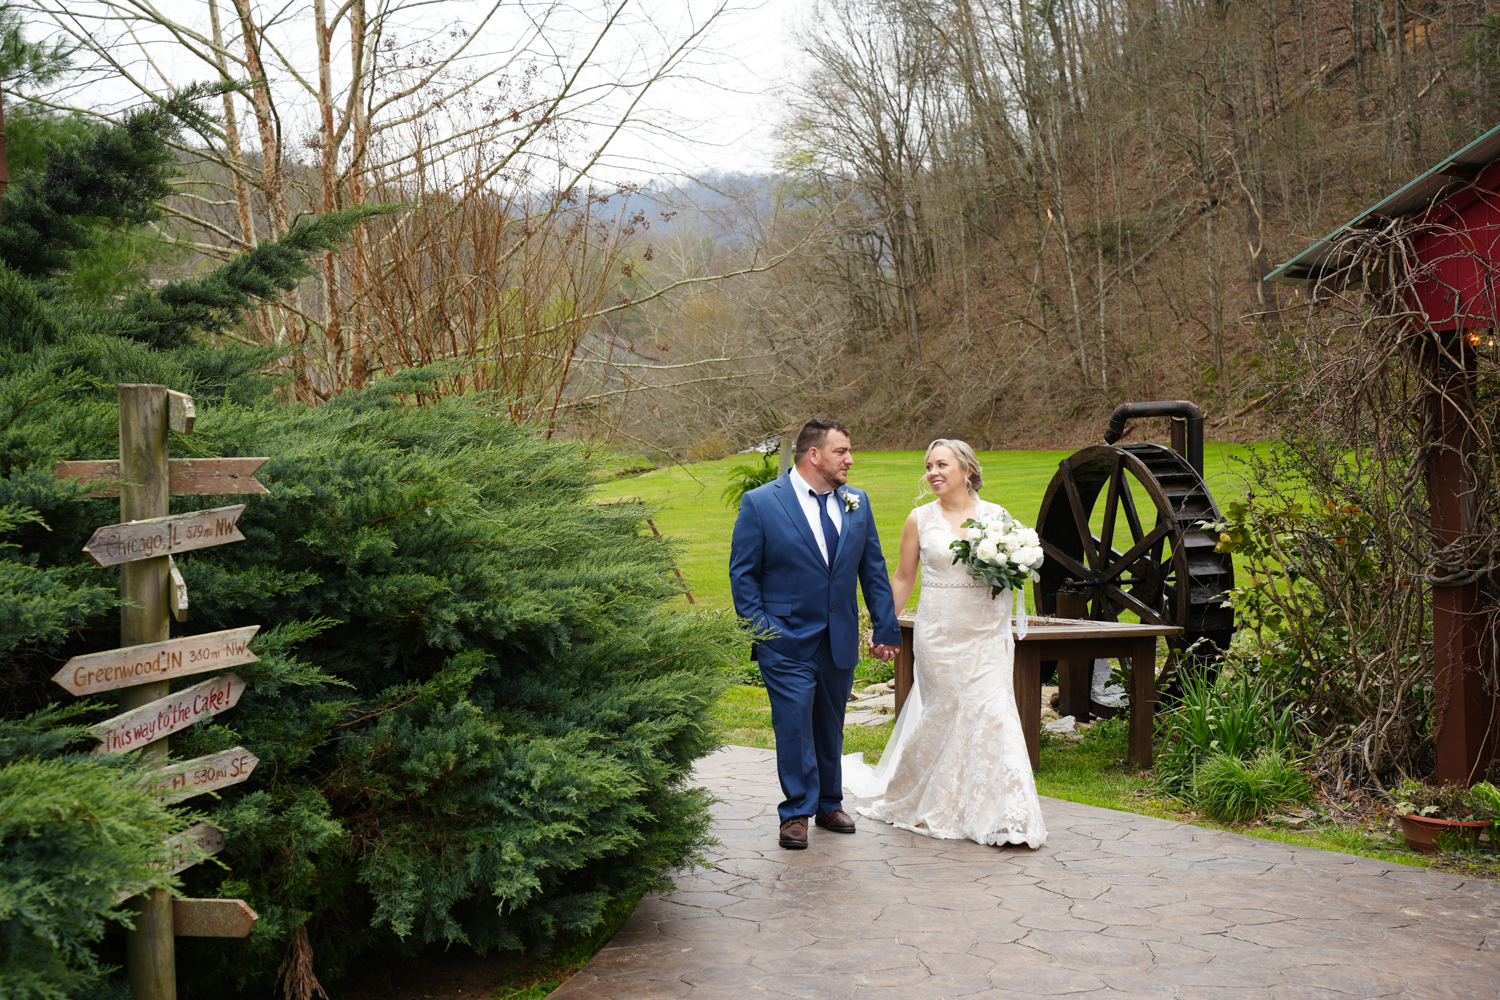 Couple walking on their wedding day by a water wheel at the Honeysuckle Hills wedding venue in Pigeon Forge